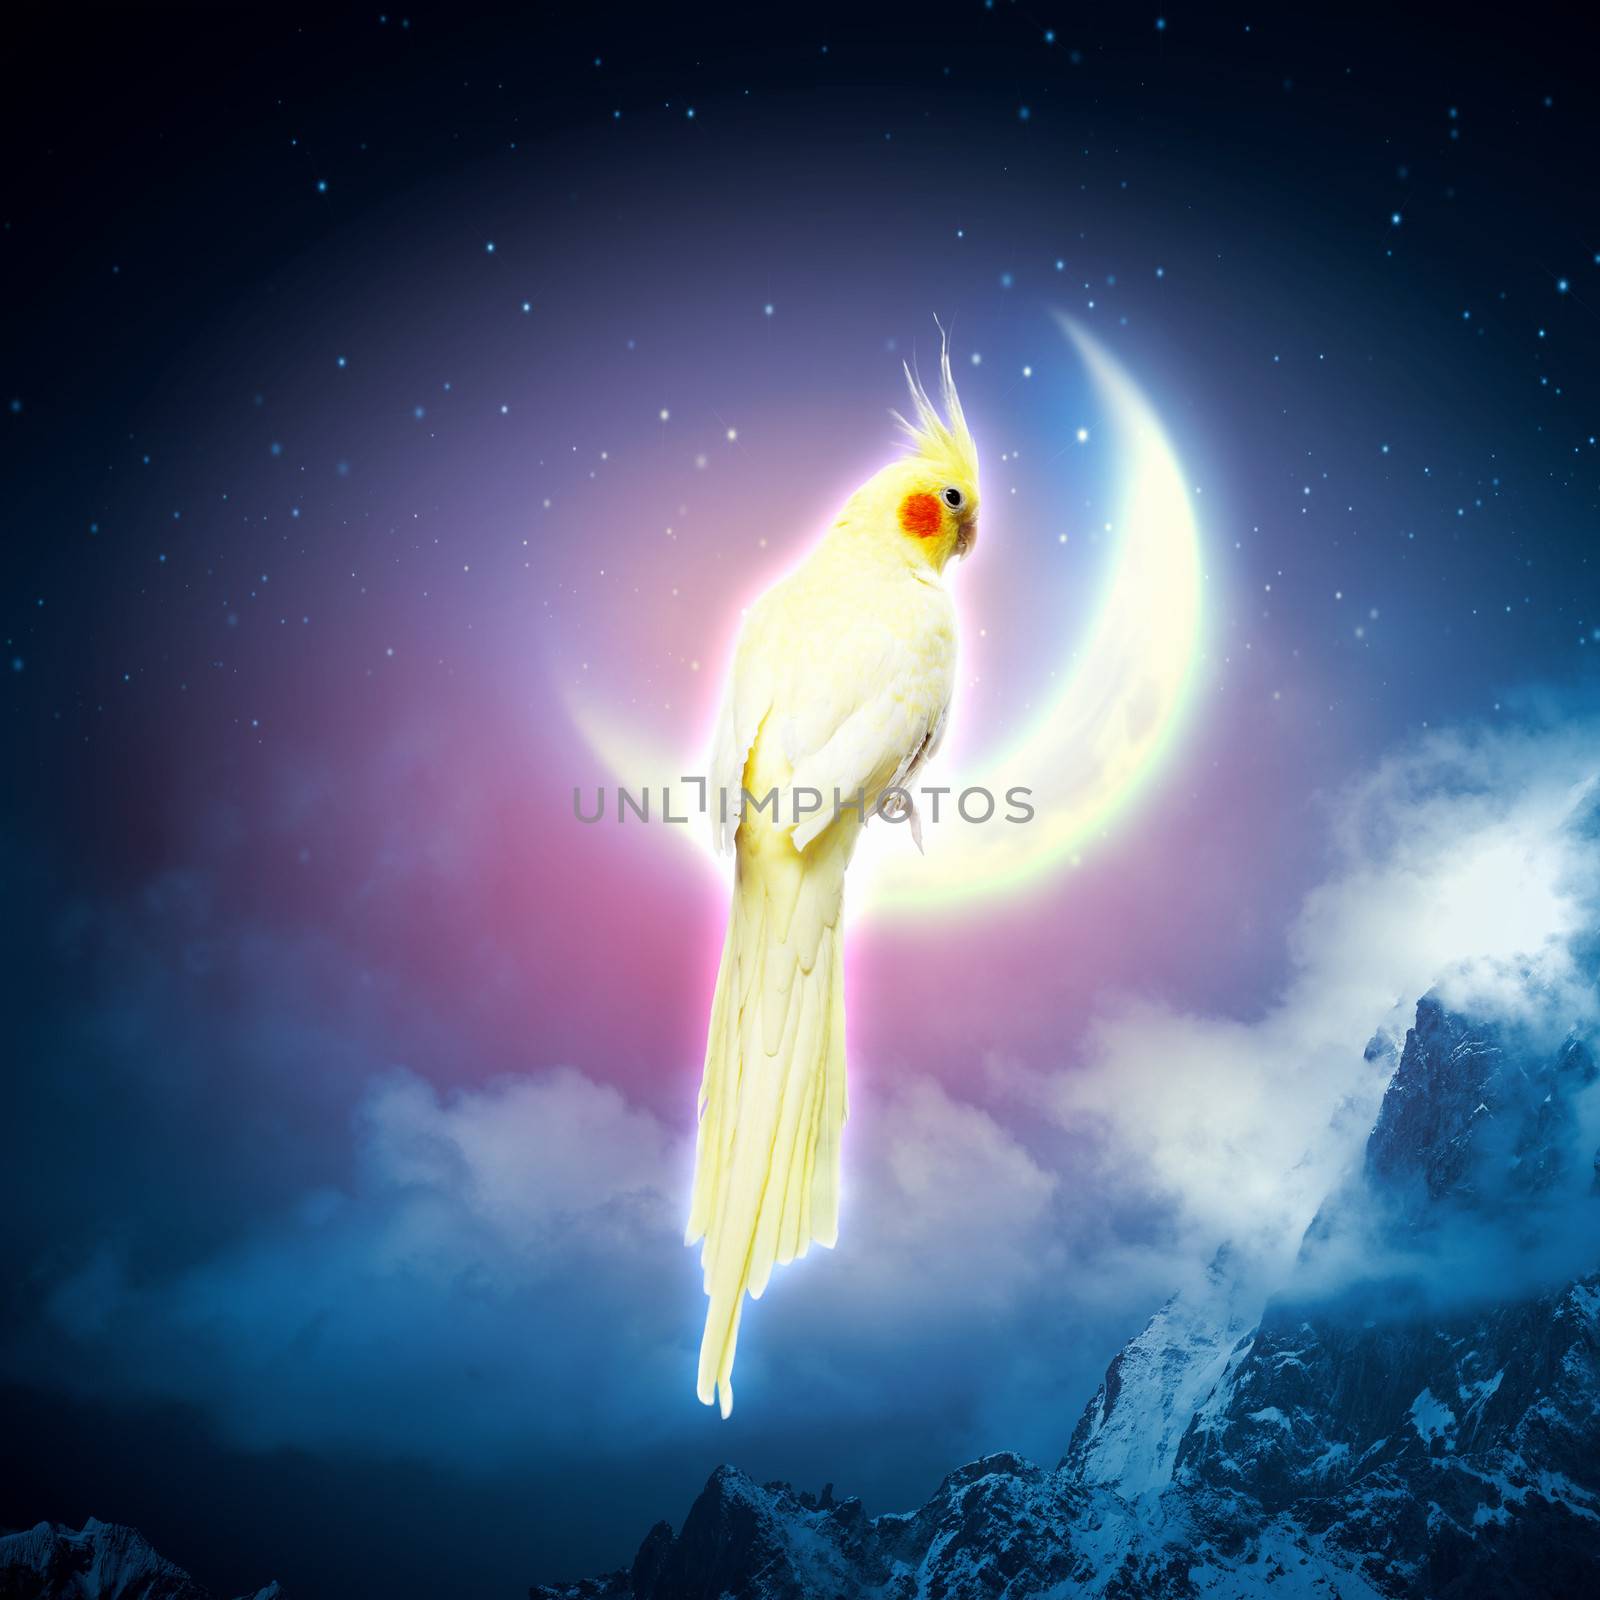 Image of yellow parrot sitting on moon